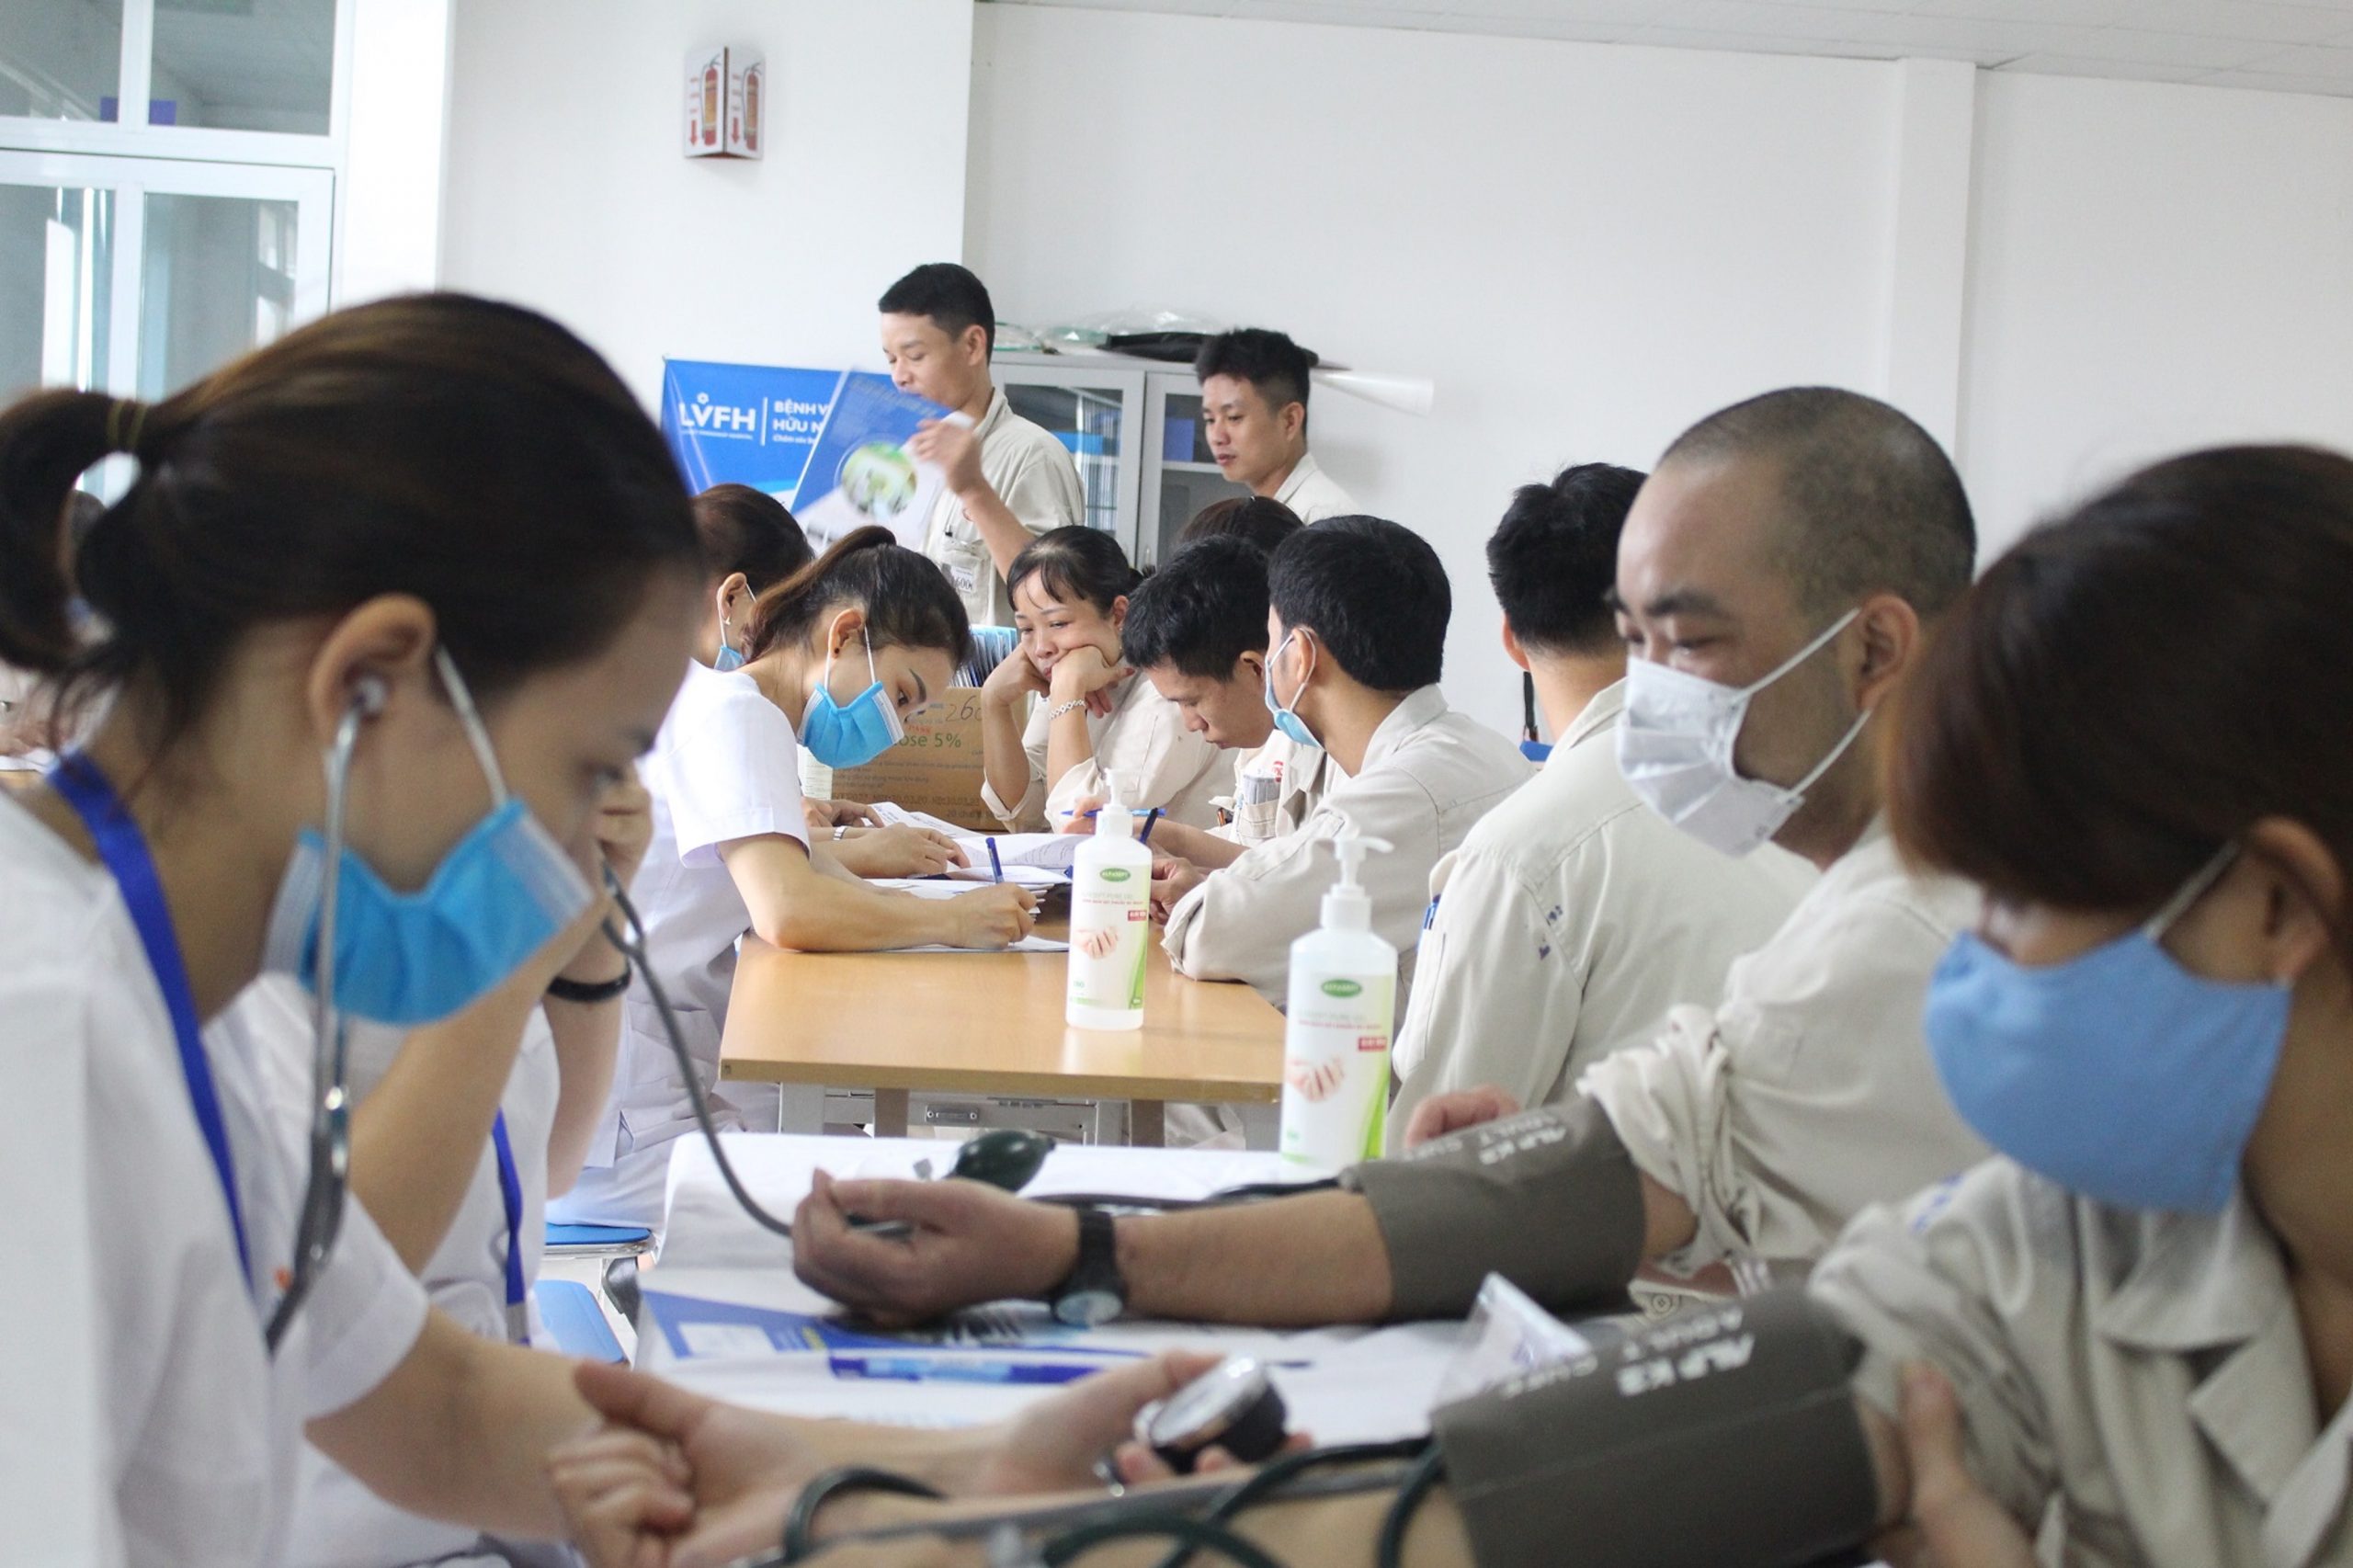 Regulations on ealth check-ups and treatment for occupational diseases applicable to employees in Vietnam